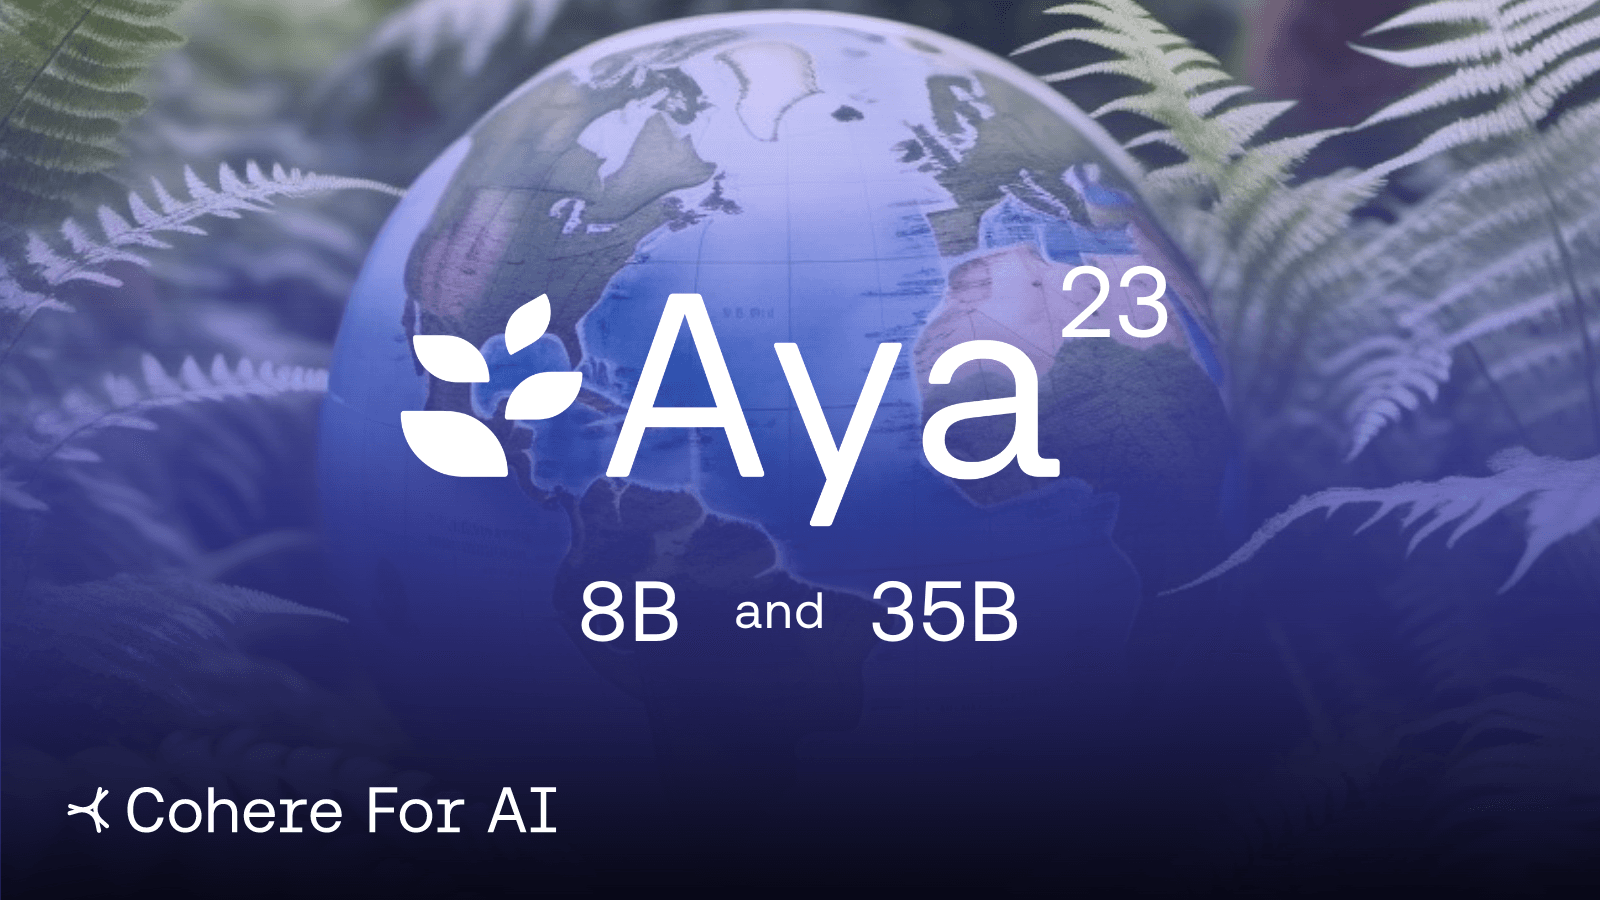 Cohere For AI Launches Aya 23, 8 and 35 Billion Parameter Open Weights Release